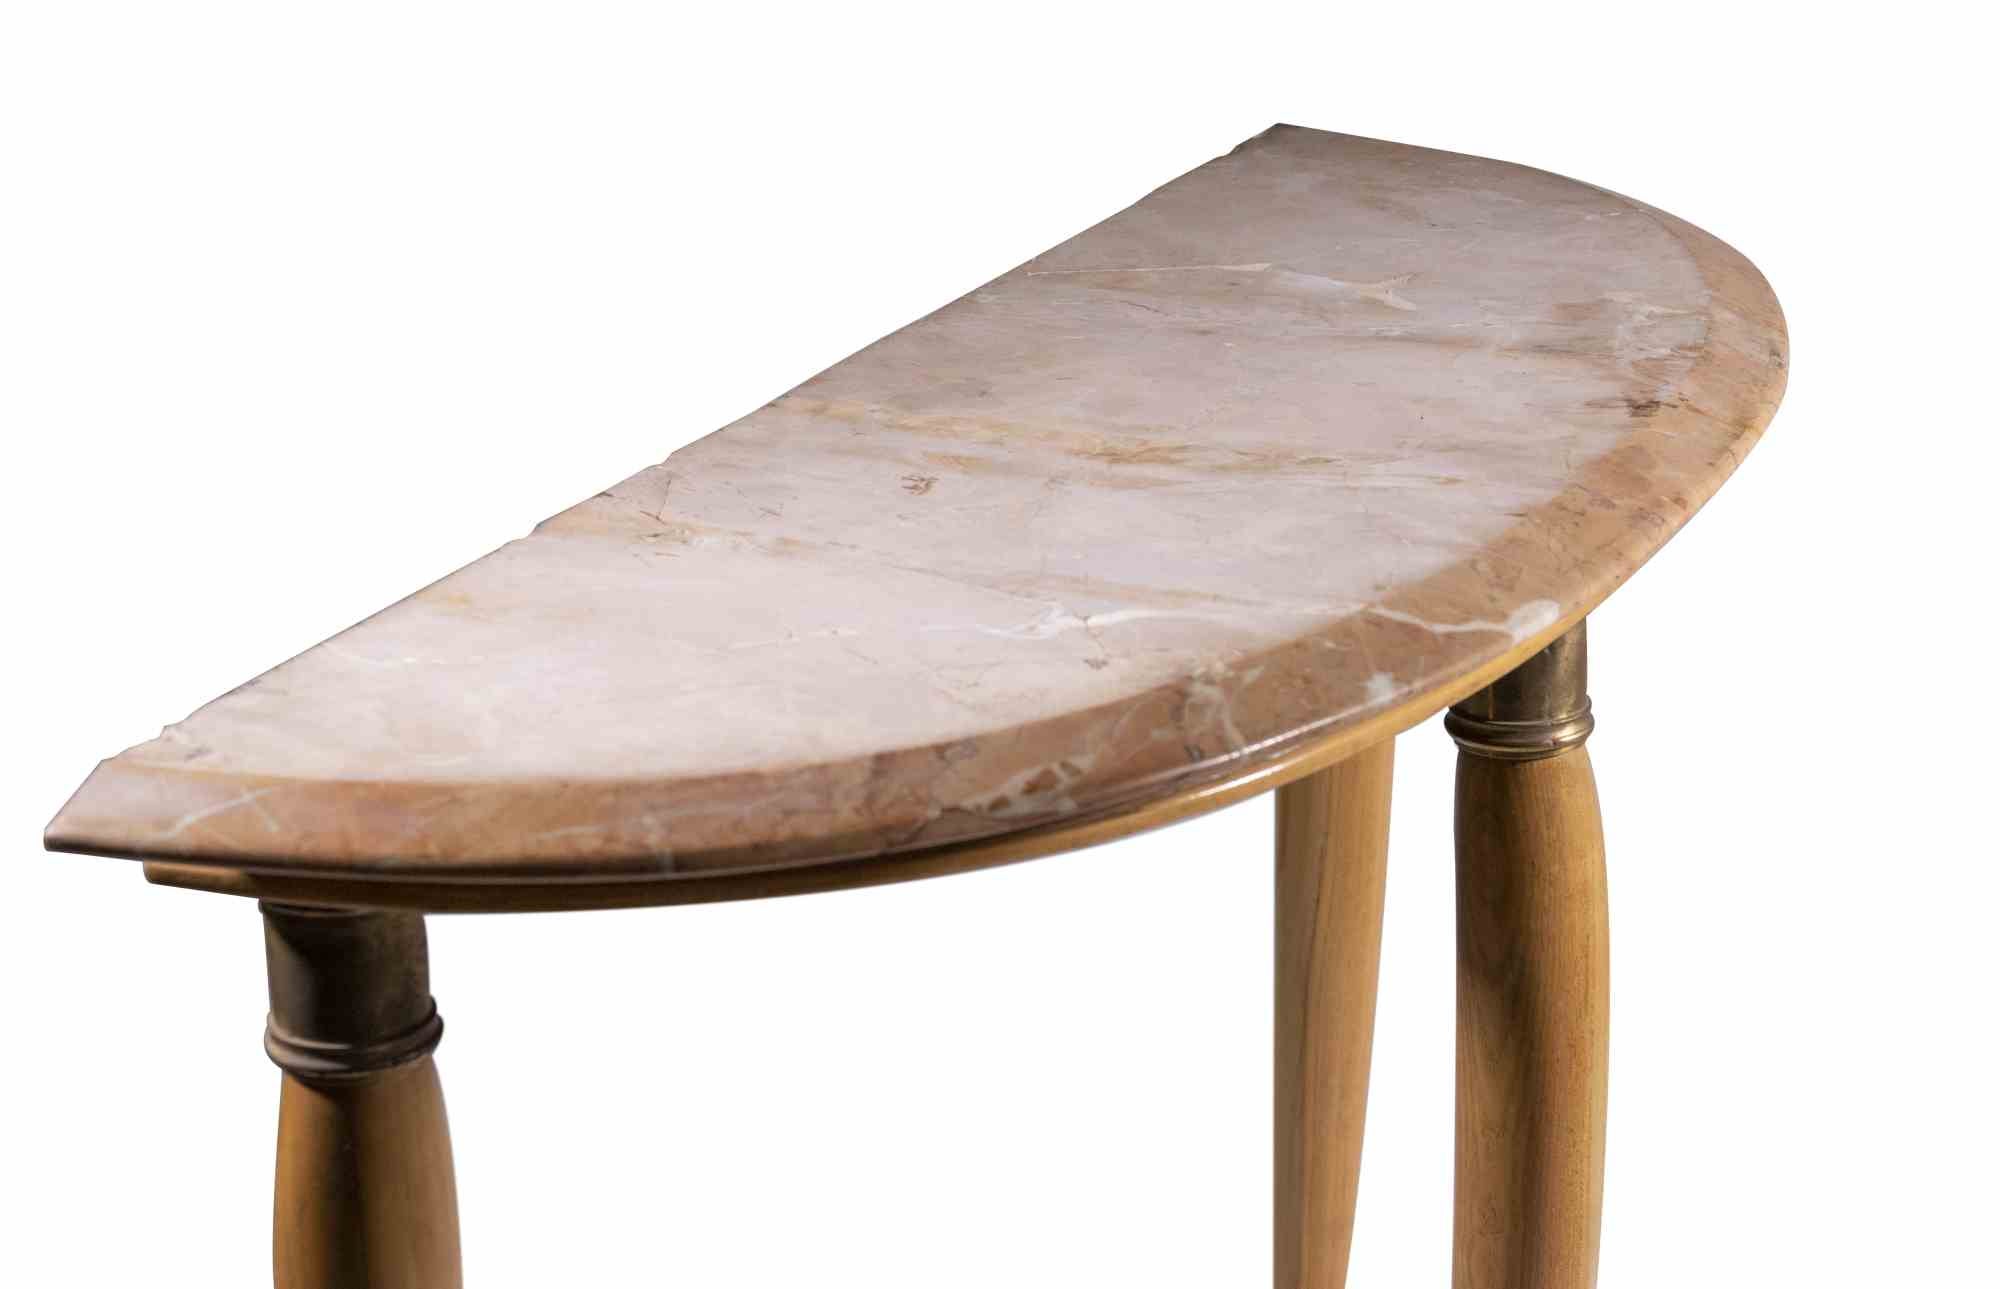 Consolle is an original design furniture item attributed to Paolo Buffa and realized in the 1950s.

A vintage wooden consolle with marble top.

Mint conditions (some lack on the marble top).